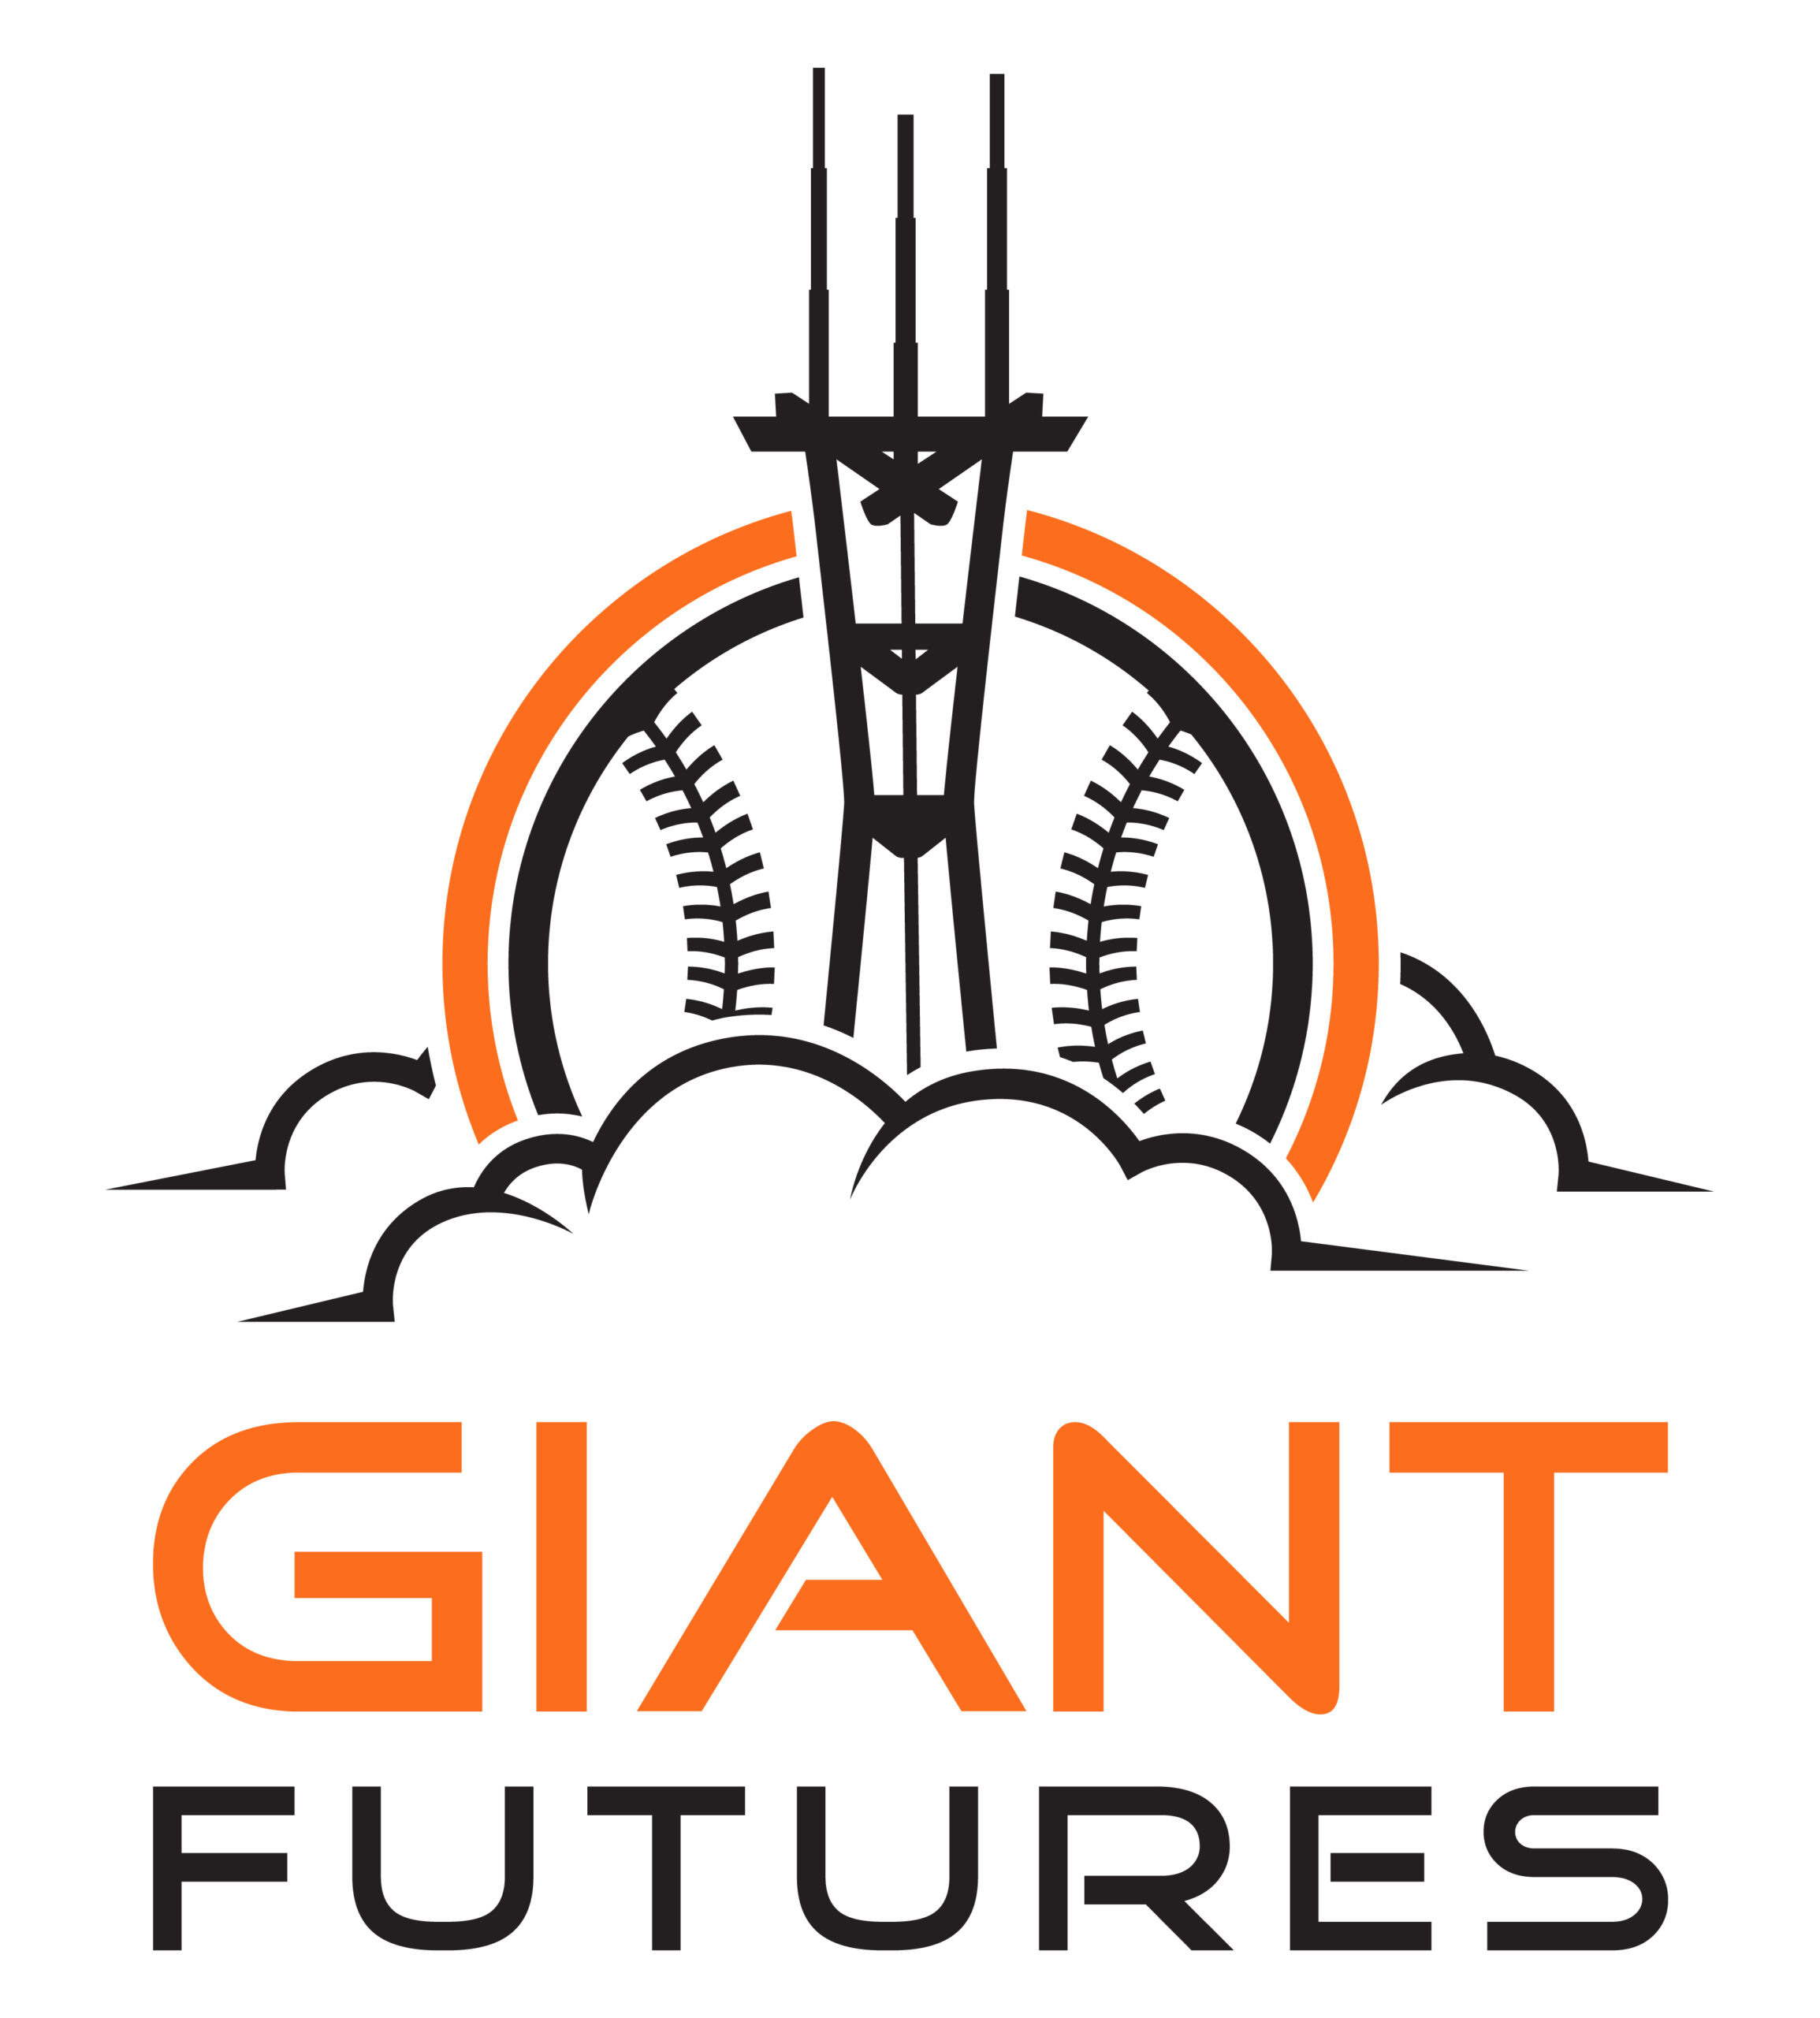 The Giants City Connect Uniforms: Uninspired - Giant Futures